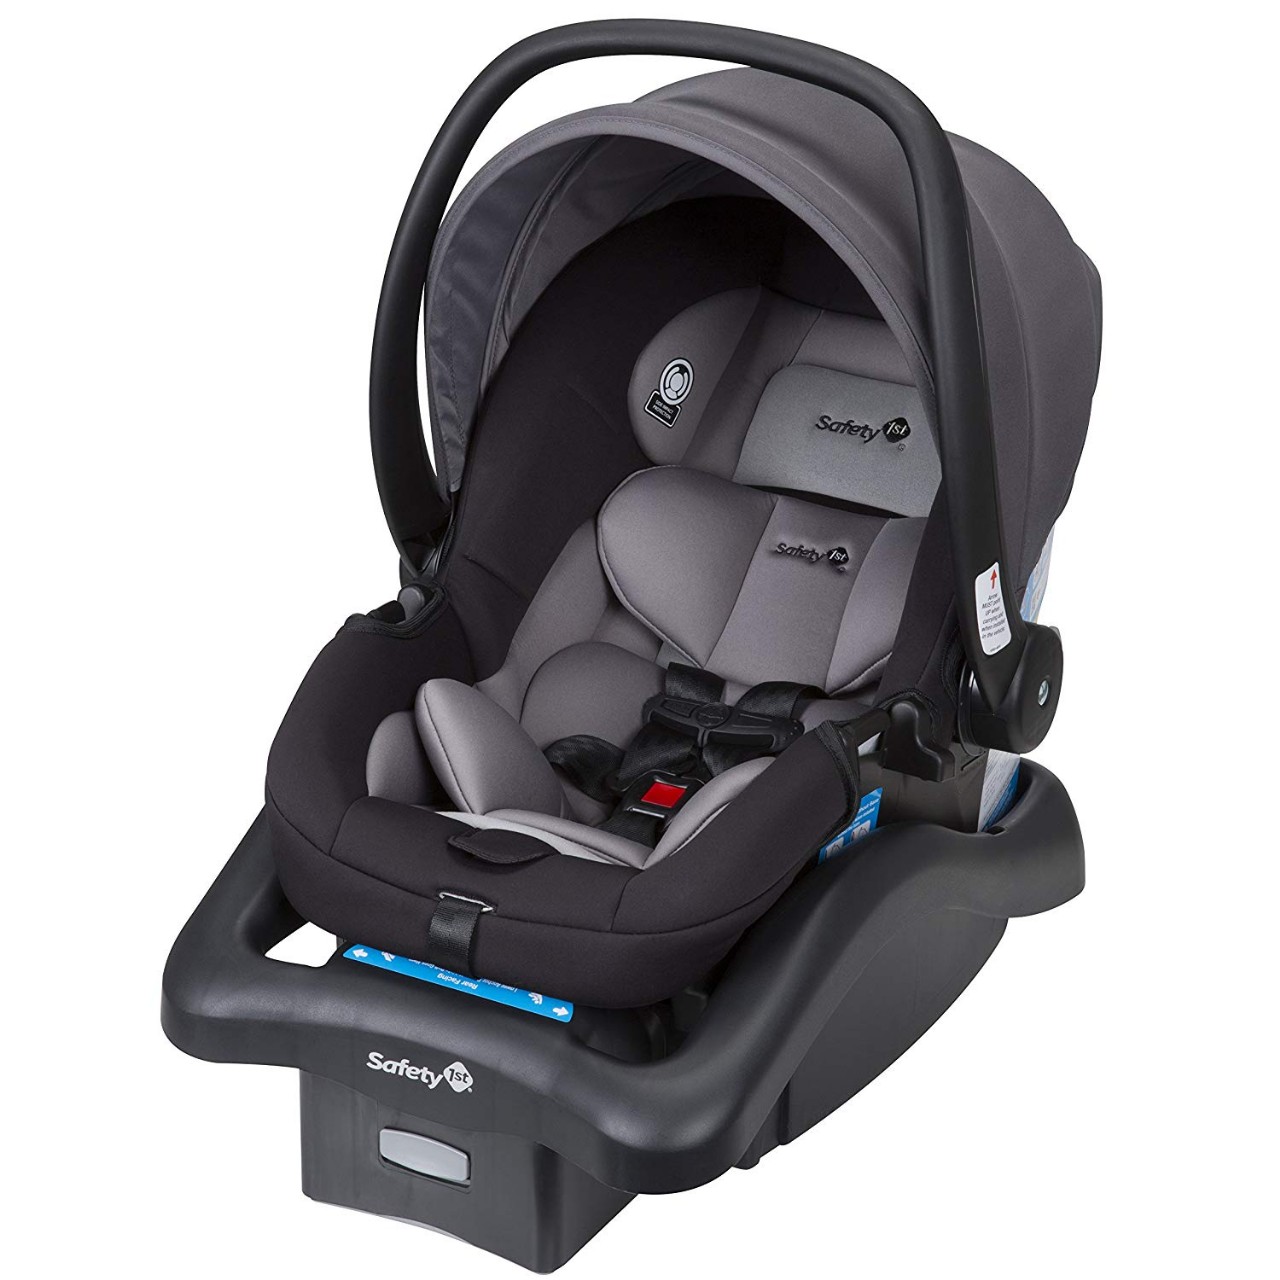 Safety 1st onBoard 35 LT Infant Car Seat (Monument)